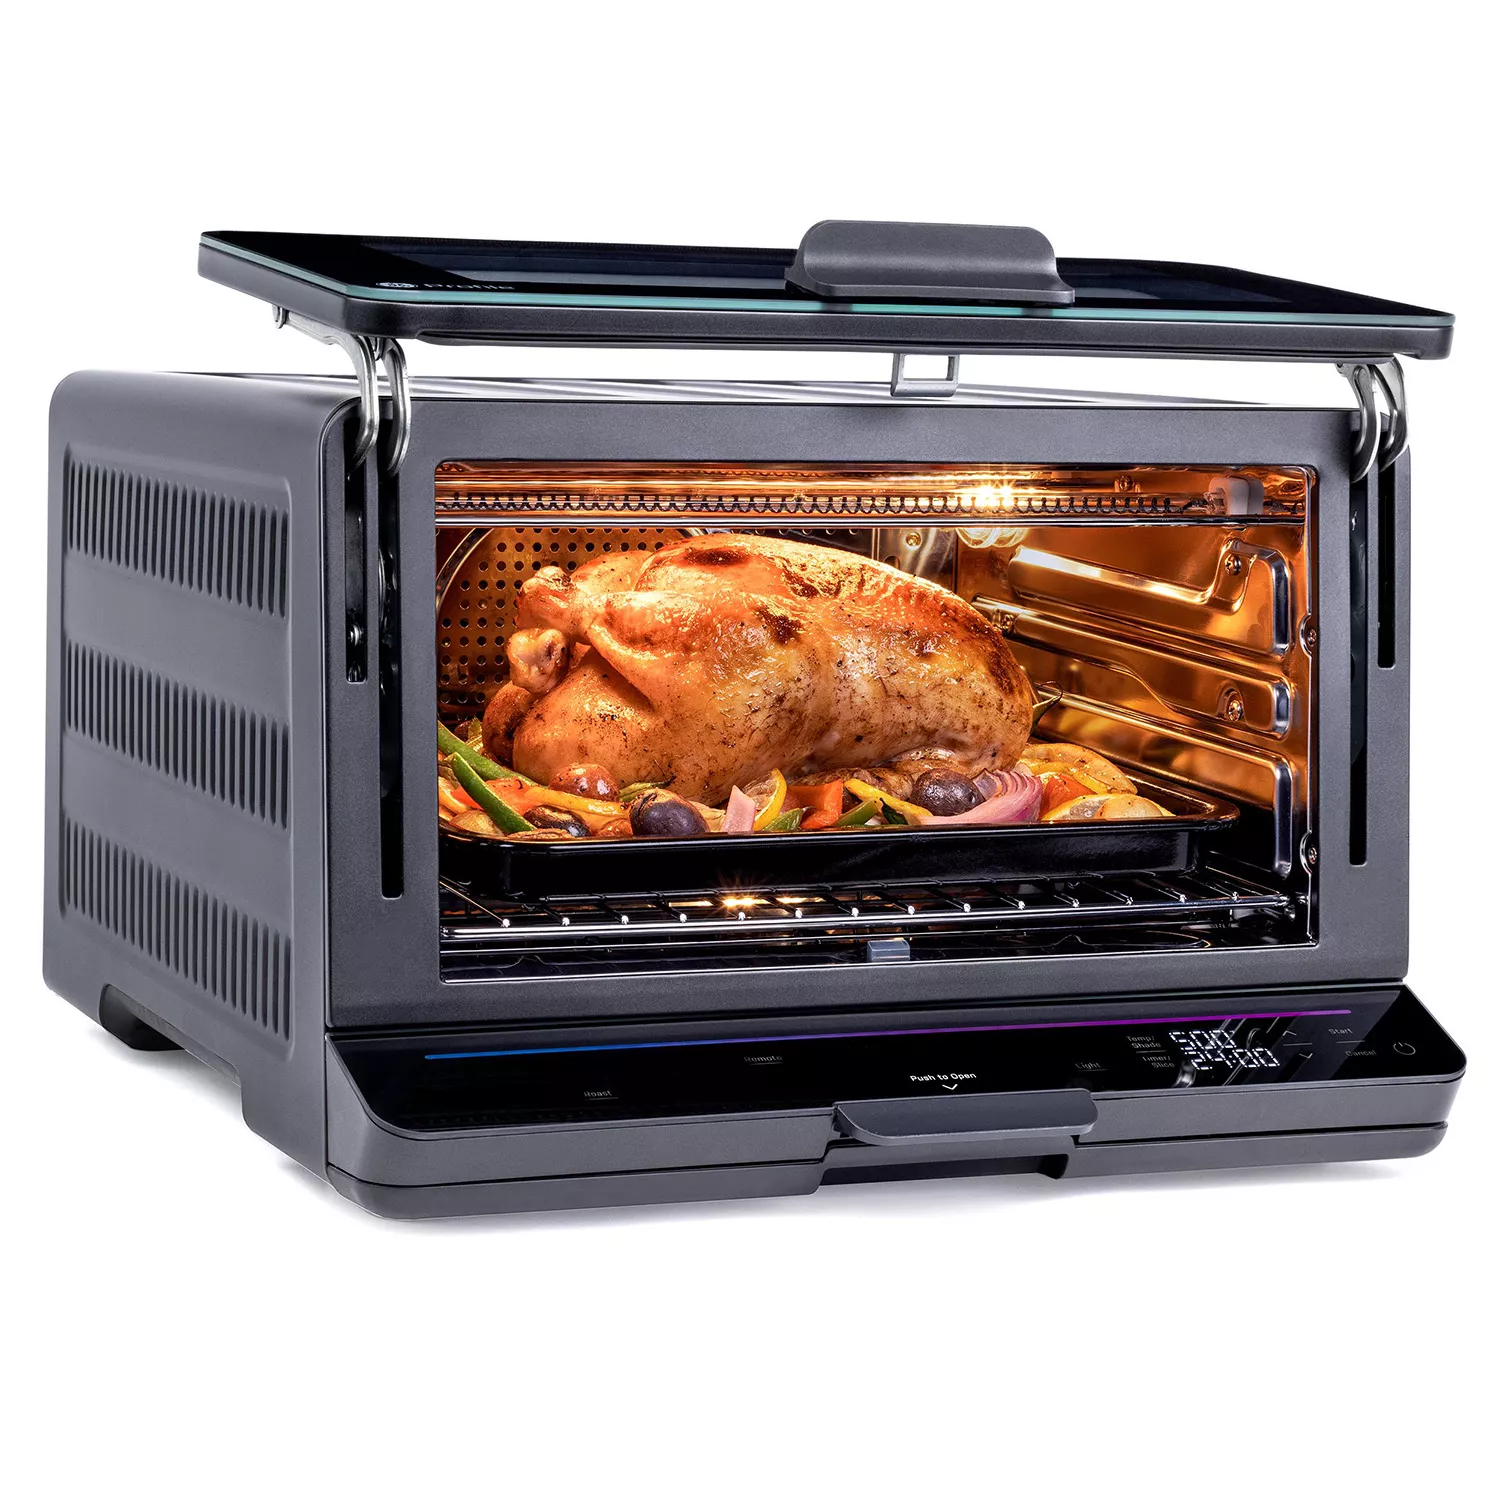 GE-Toaster-Oven